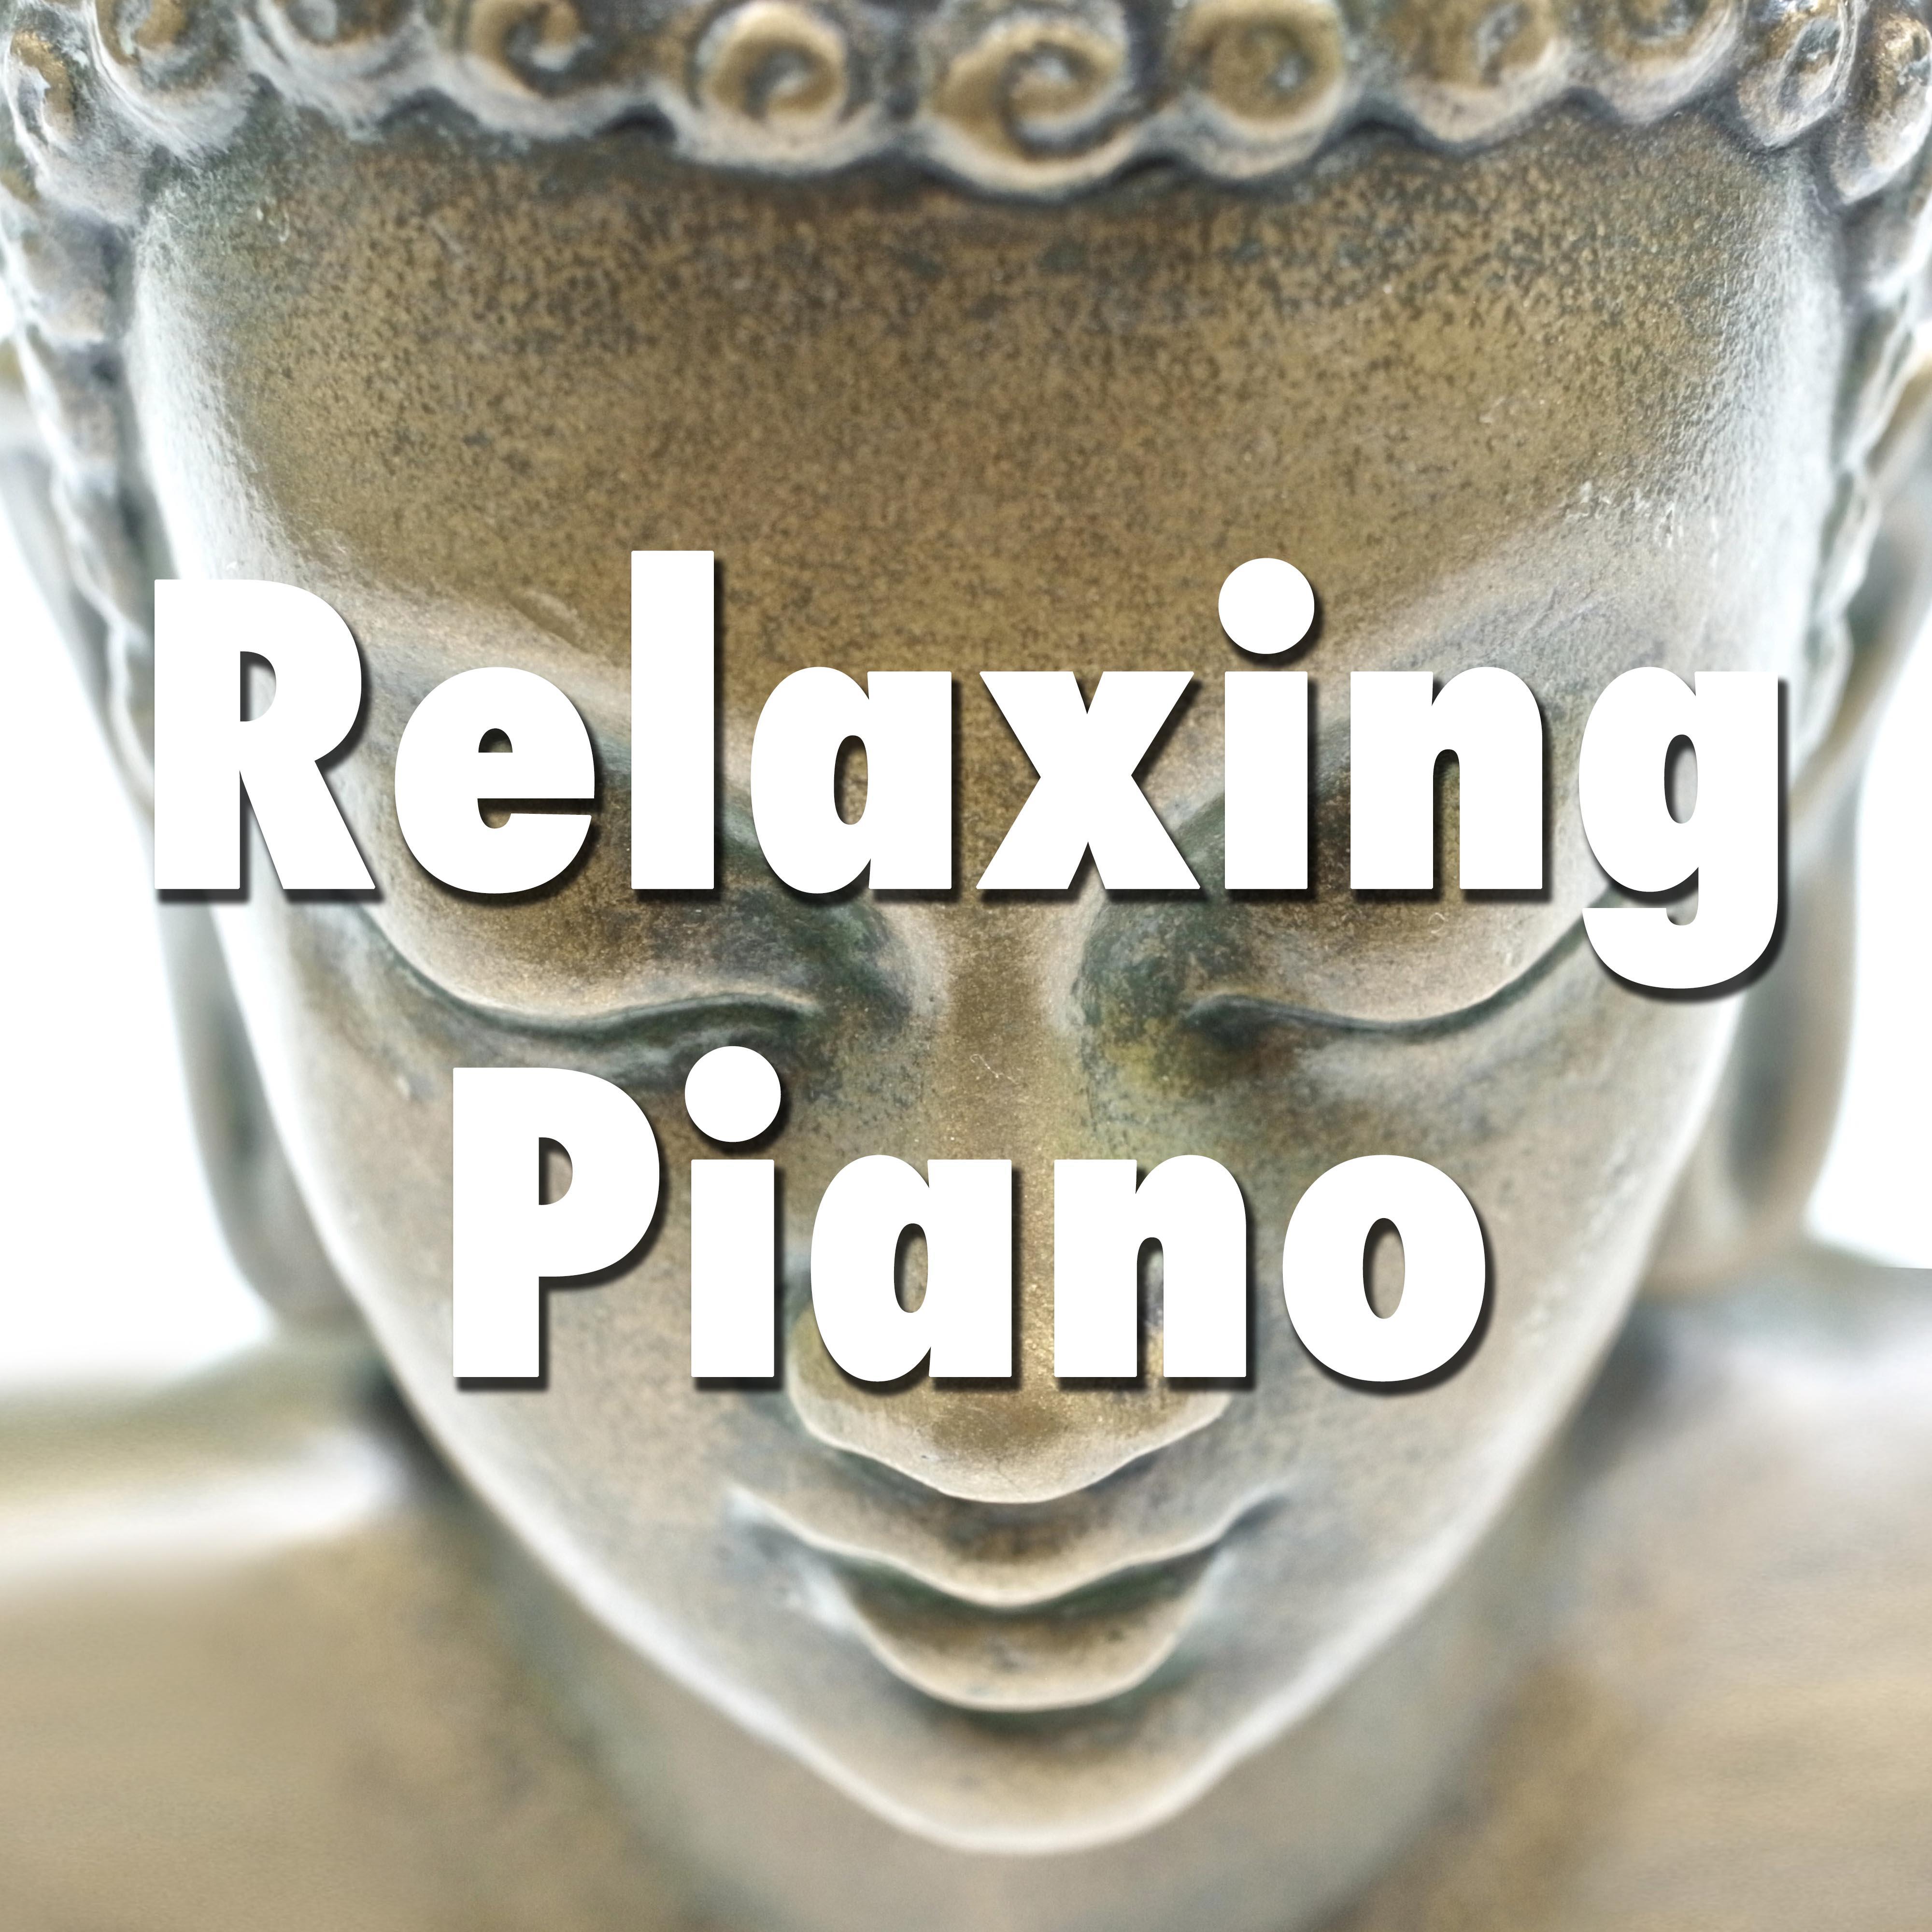 Relaxing Piano: New Age Music with Piano Lullabies and Sounds of Nature to find Inner Peace and Serenity